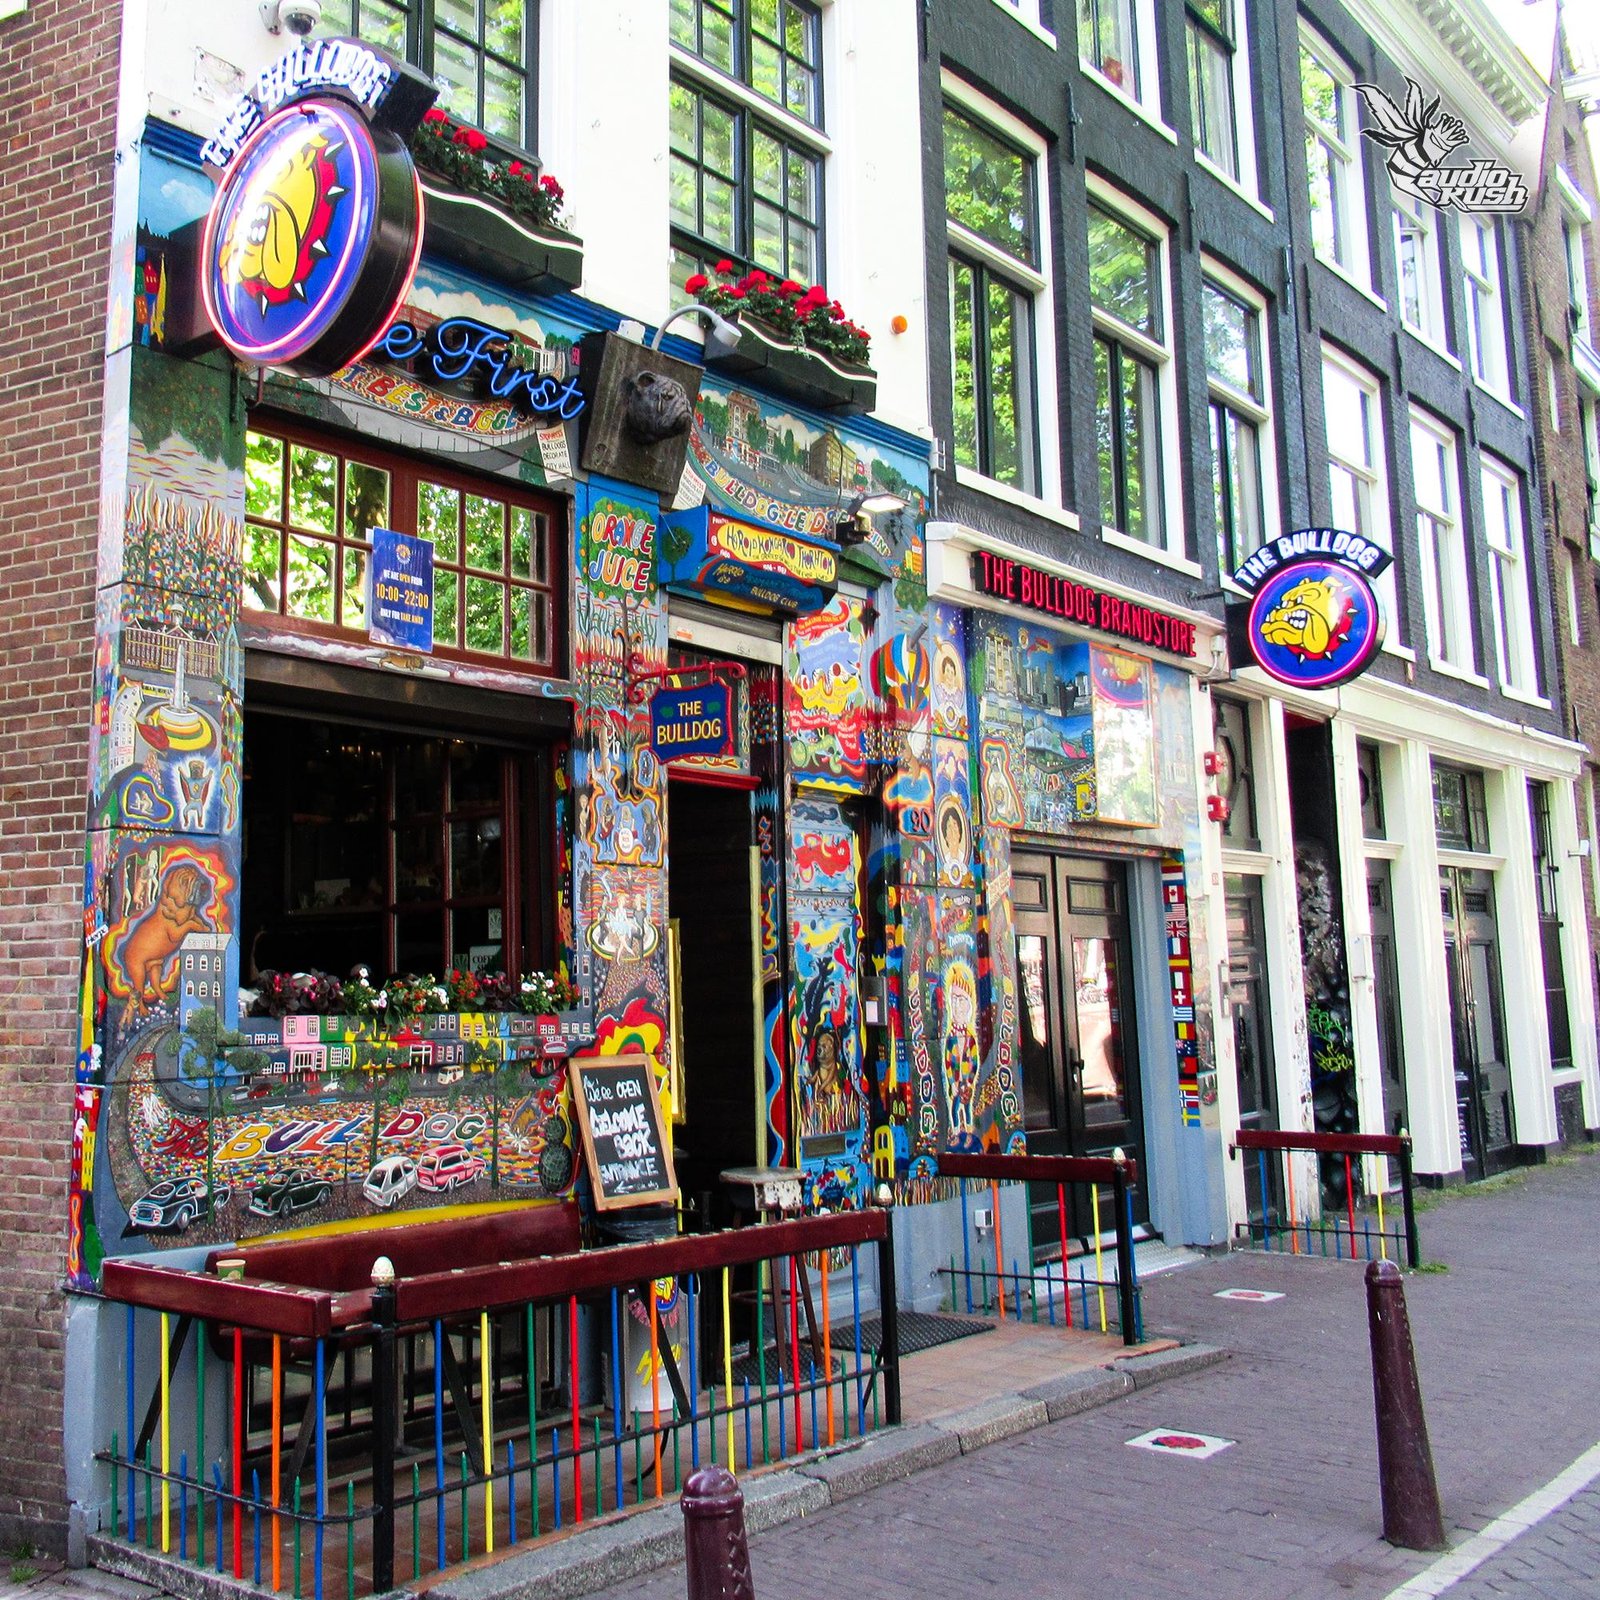 https://audiokushhq.com/directory/wp-content/uploads/sites/2/2020/08/Amsterdam-Coffeeshop-The-Bulldog-First-front-angle.jpg